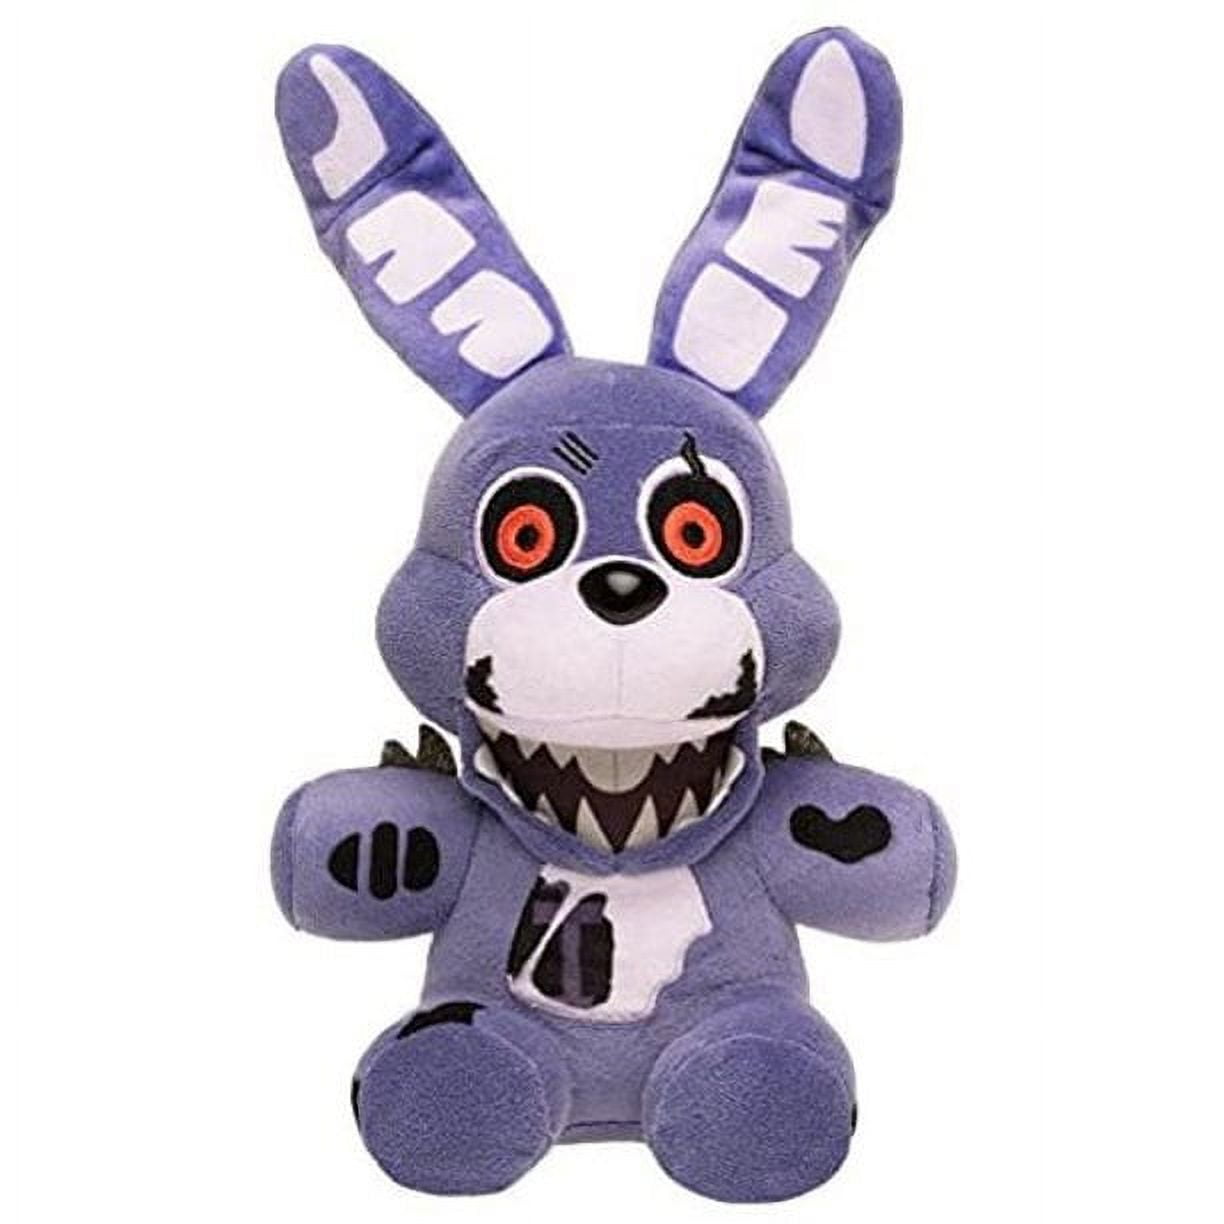 Nightmare Bonnie Plush Toy, FNAF plushies Toy, FNAF All Character Stuffed  Animal Doll Children's Gift Collection,8”(Purple Bonnie Rabbit)